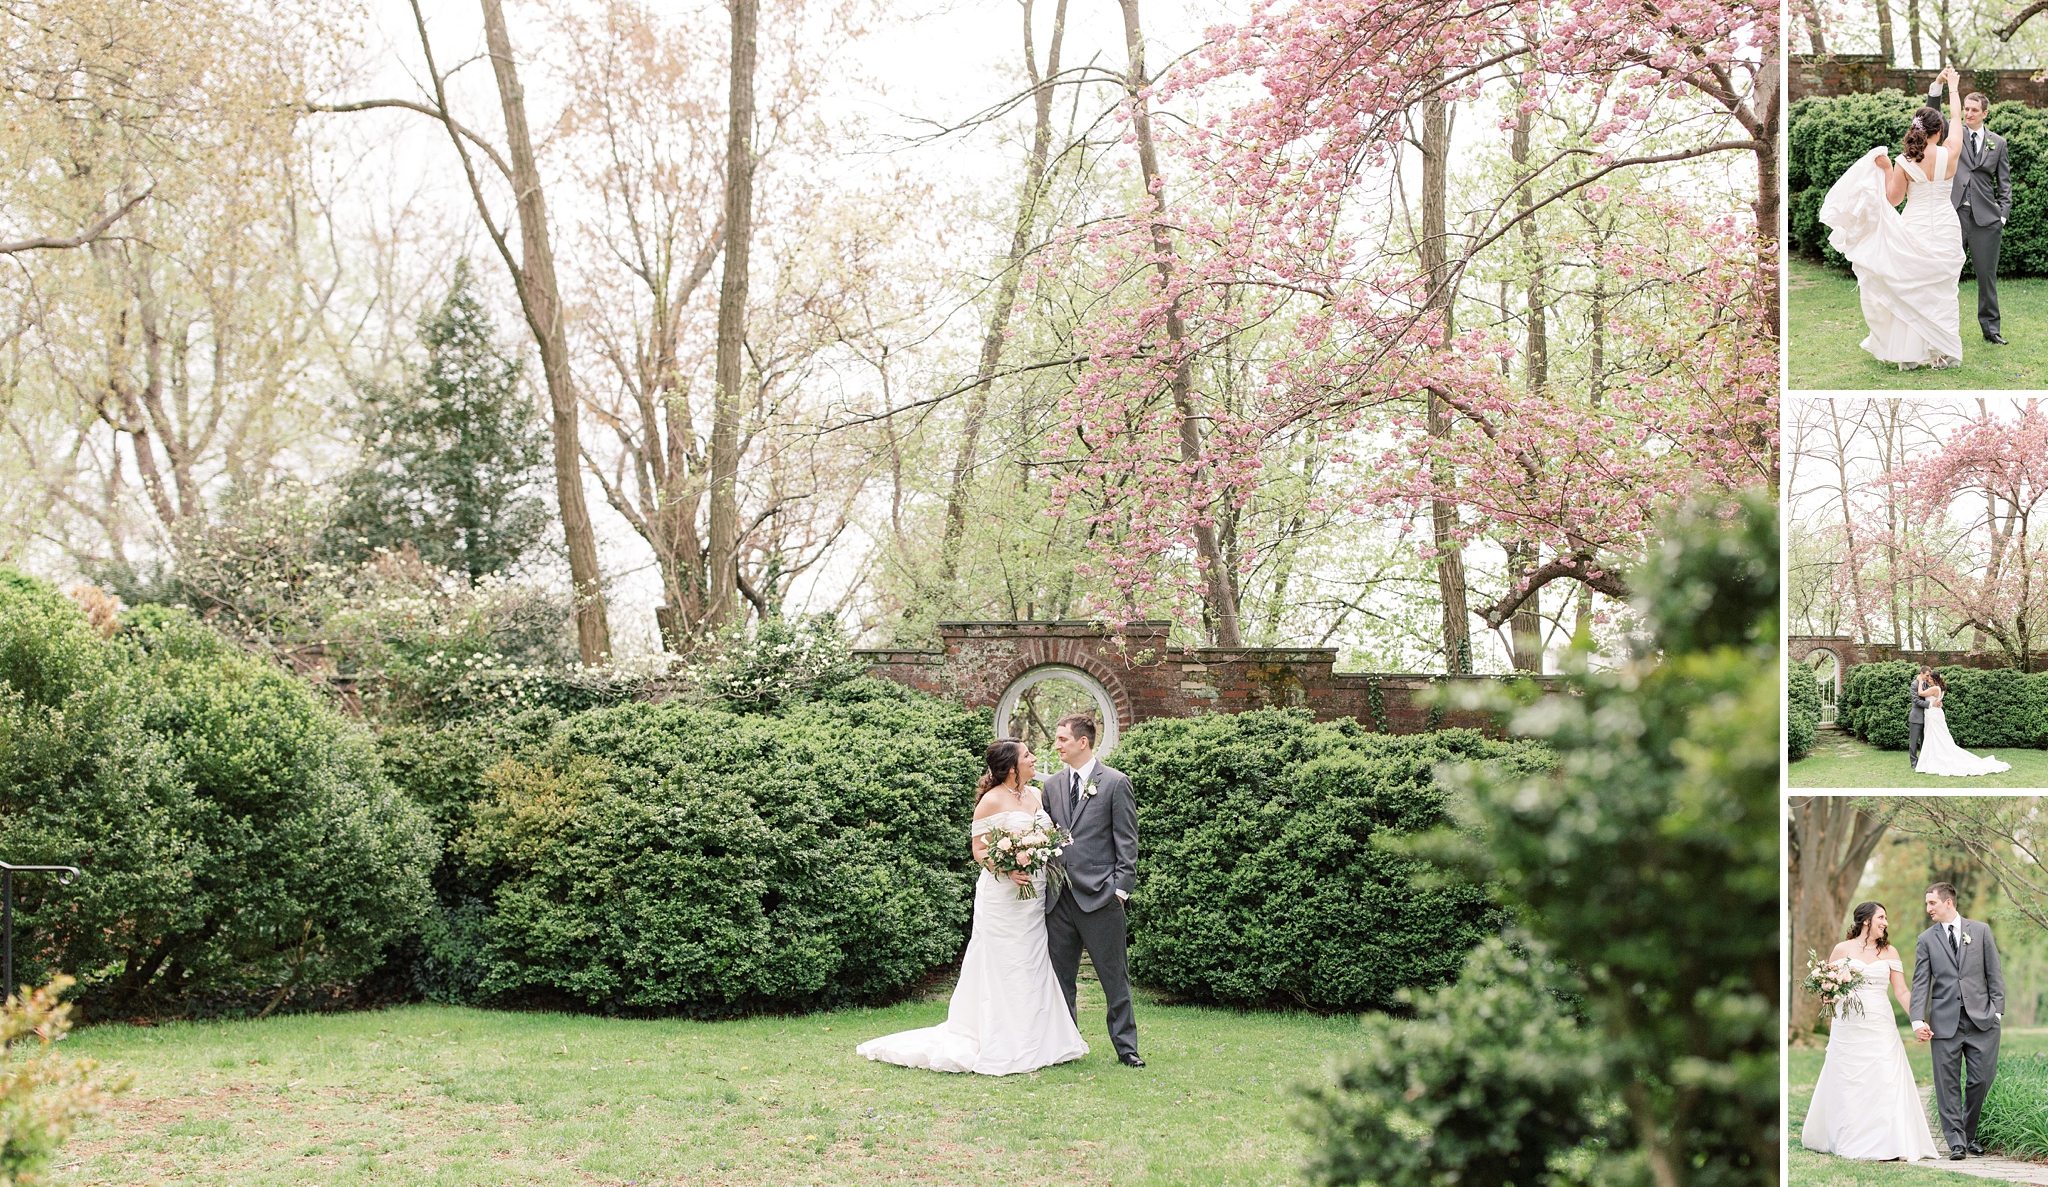 To wrap up the 2019 season, this Washington, DC wedding photographer is sharing superlatives from the most stunning affairs of the year!